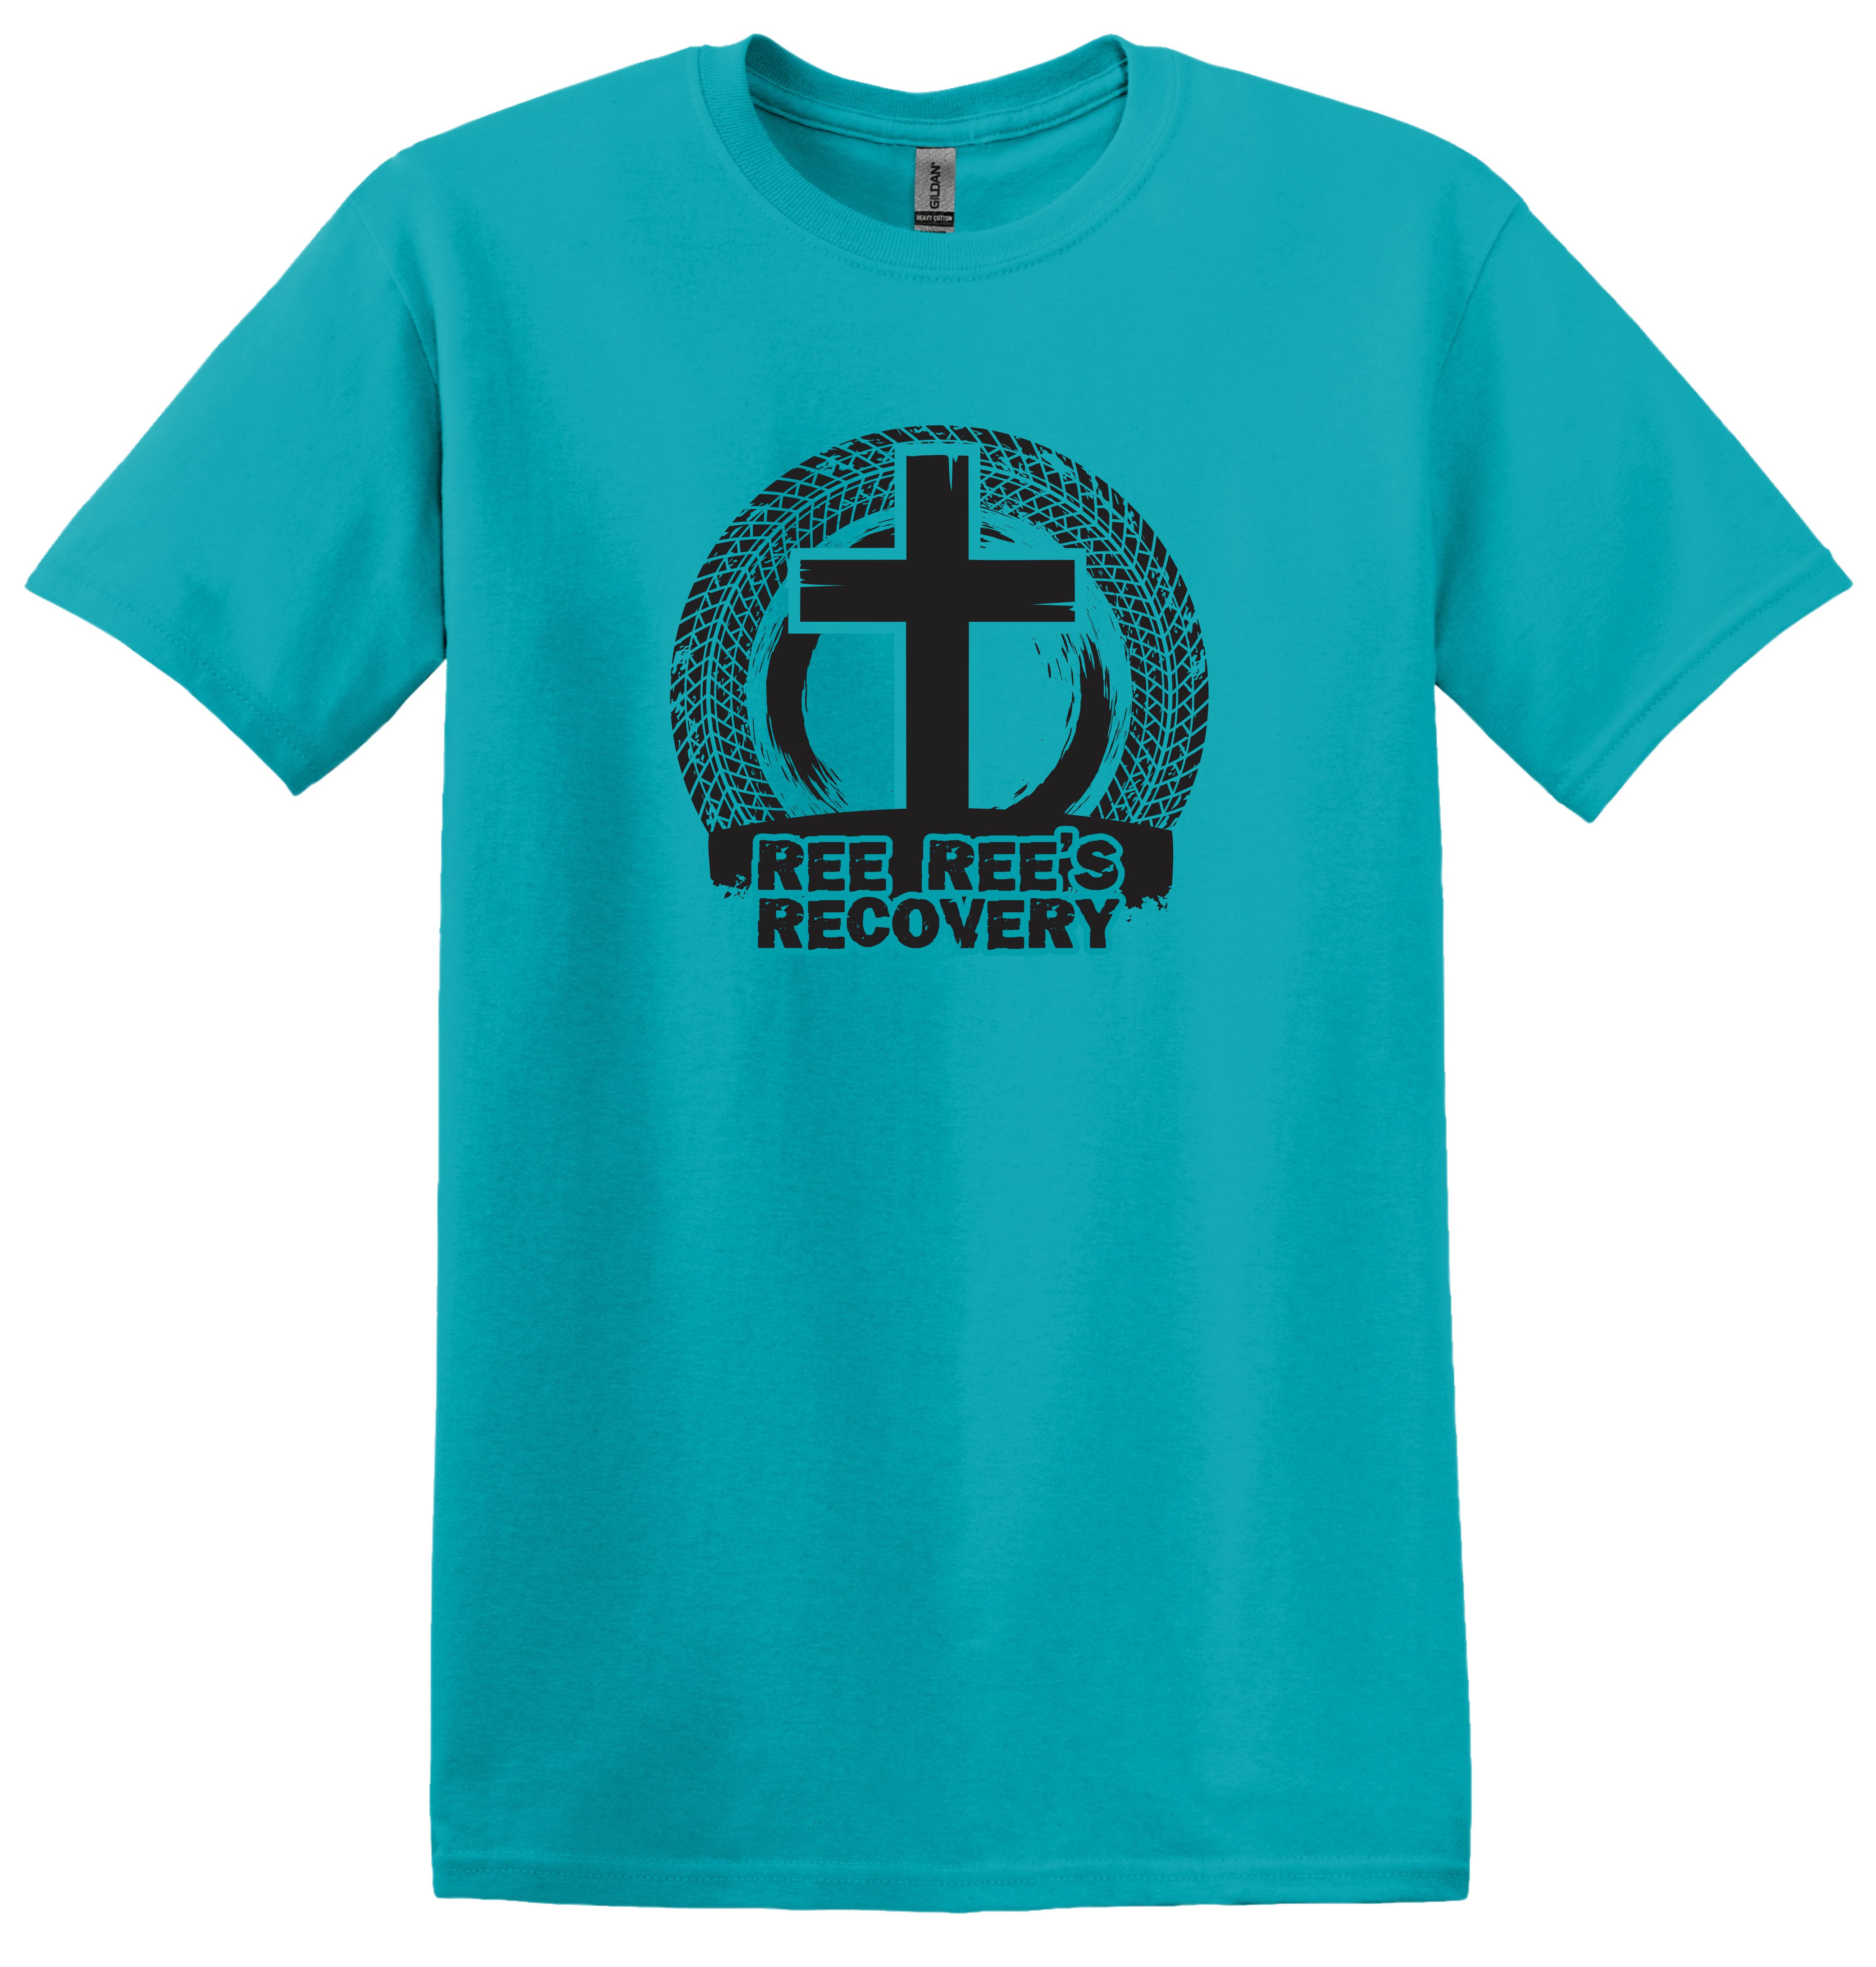 Ree Ree's Recovery T-shirt